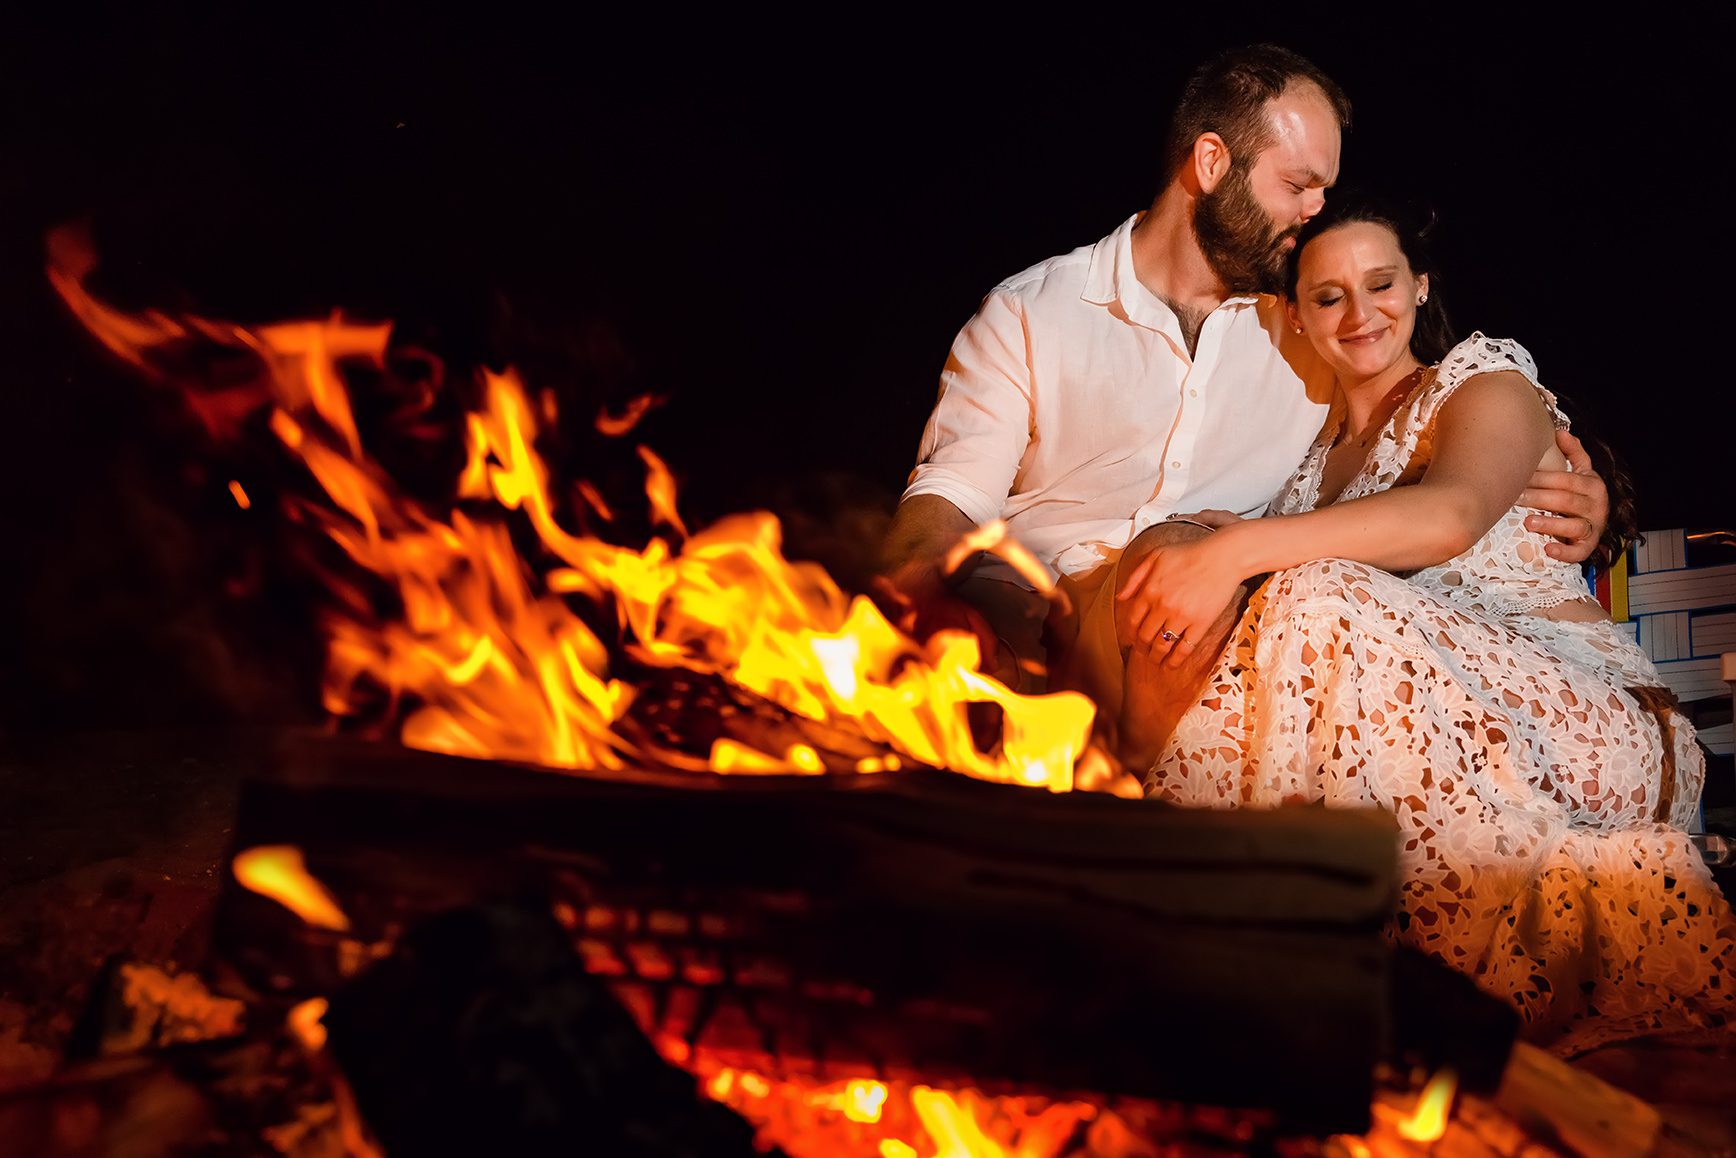 Bride and Groom at bonfire on beach after wedding